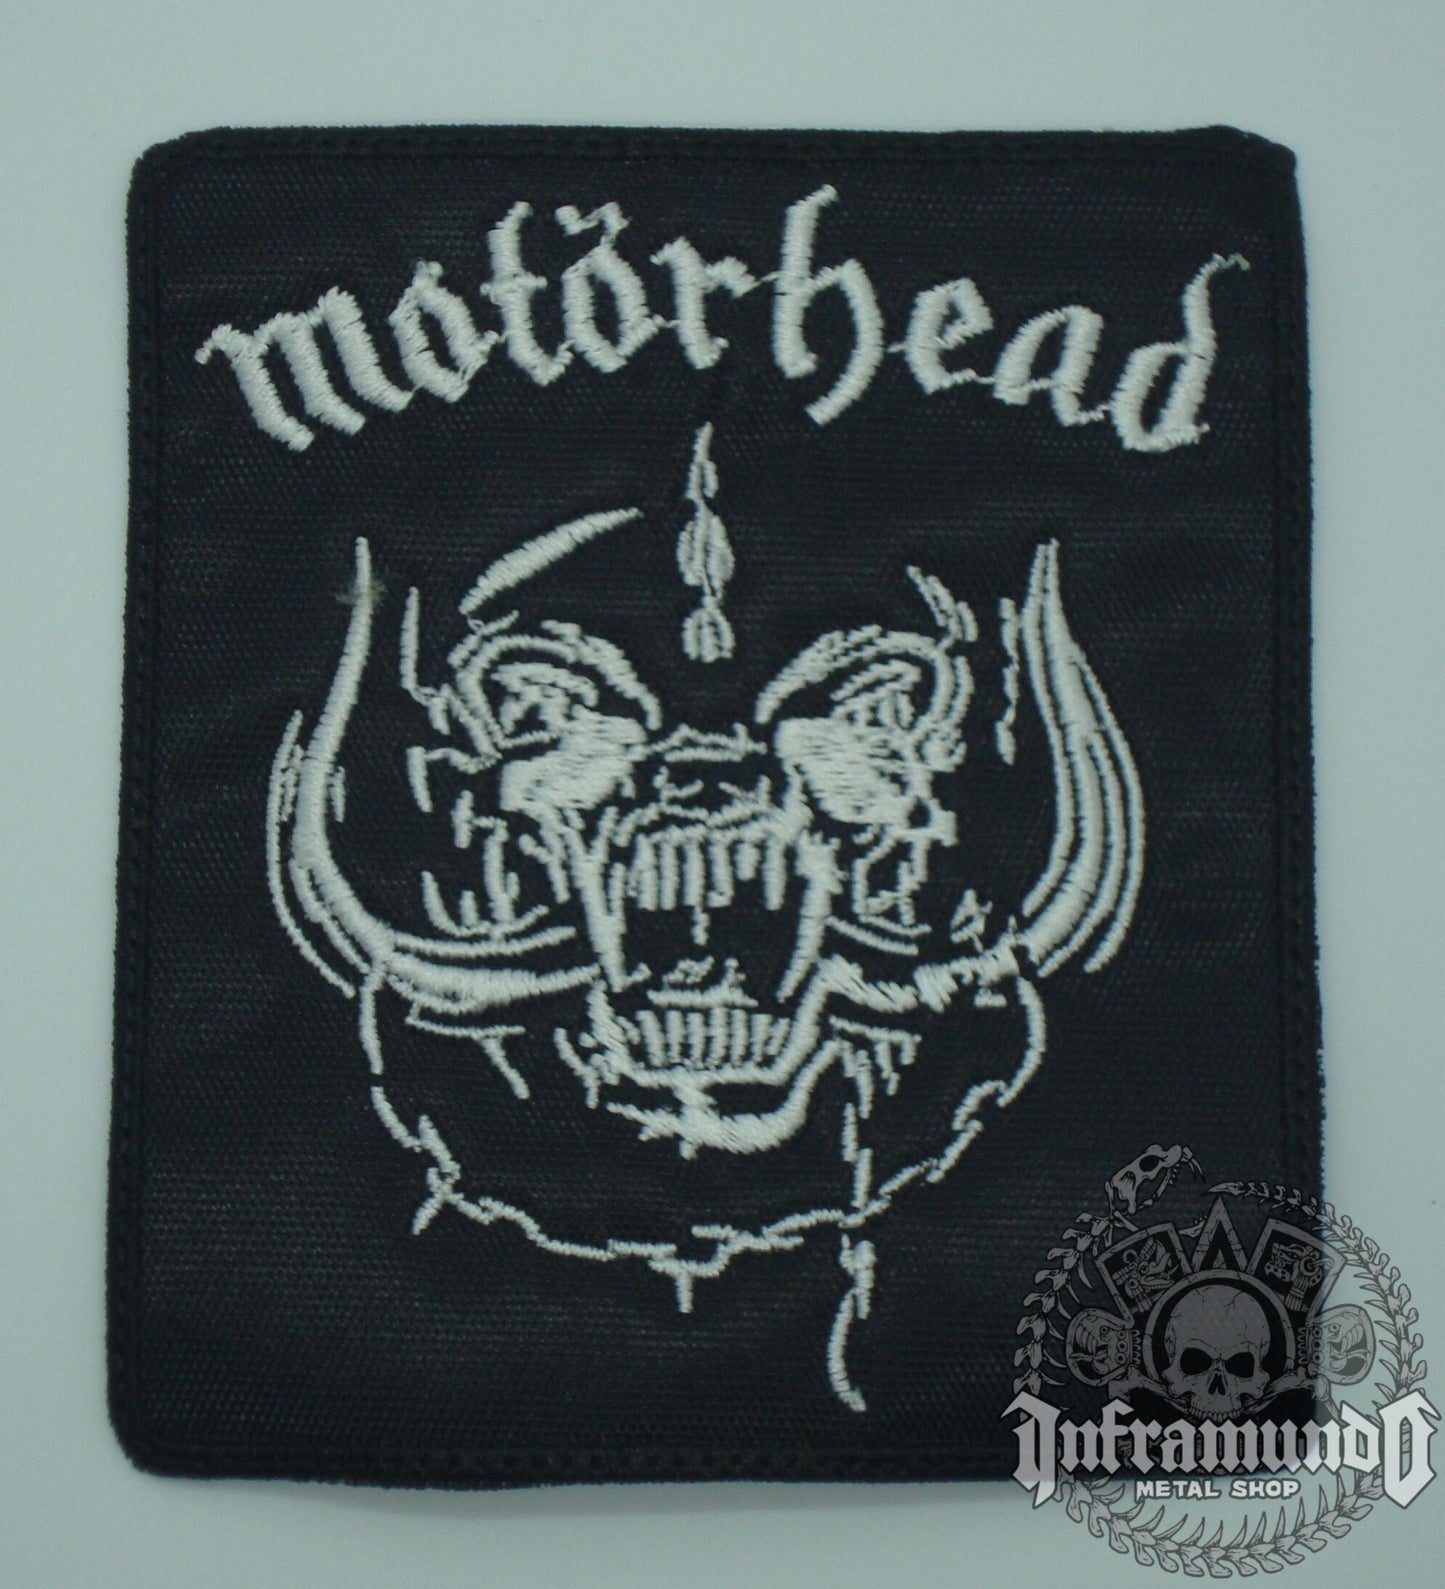 Motorhead Logo (Embroidered Patch)